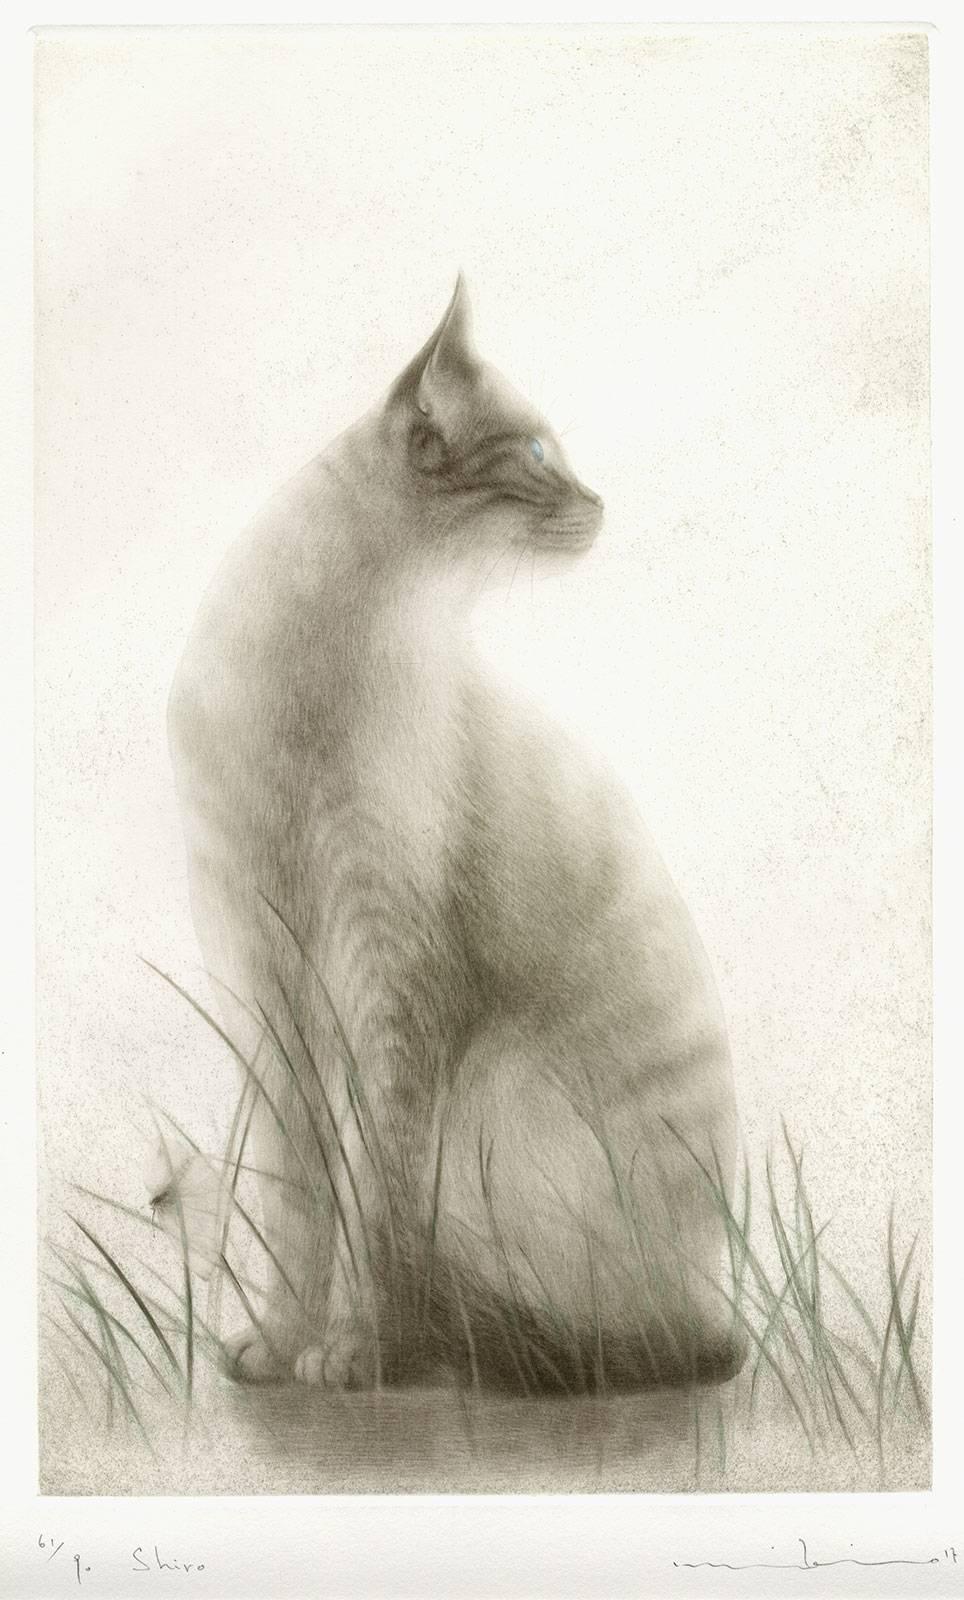 Mikio Watanabe Landscape Print - Shiro (portrait of an elegant, alert cat sitting in a meadow with flying insect)